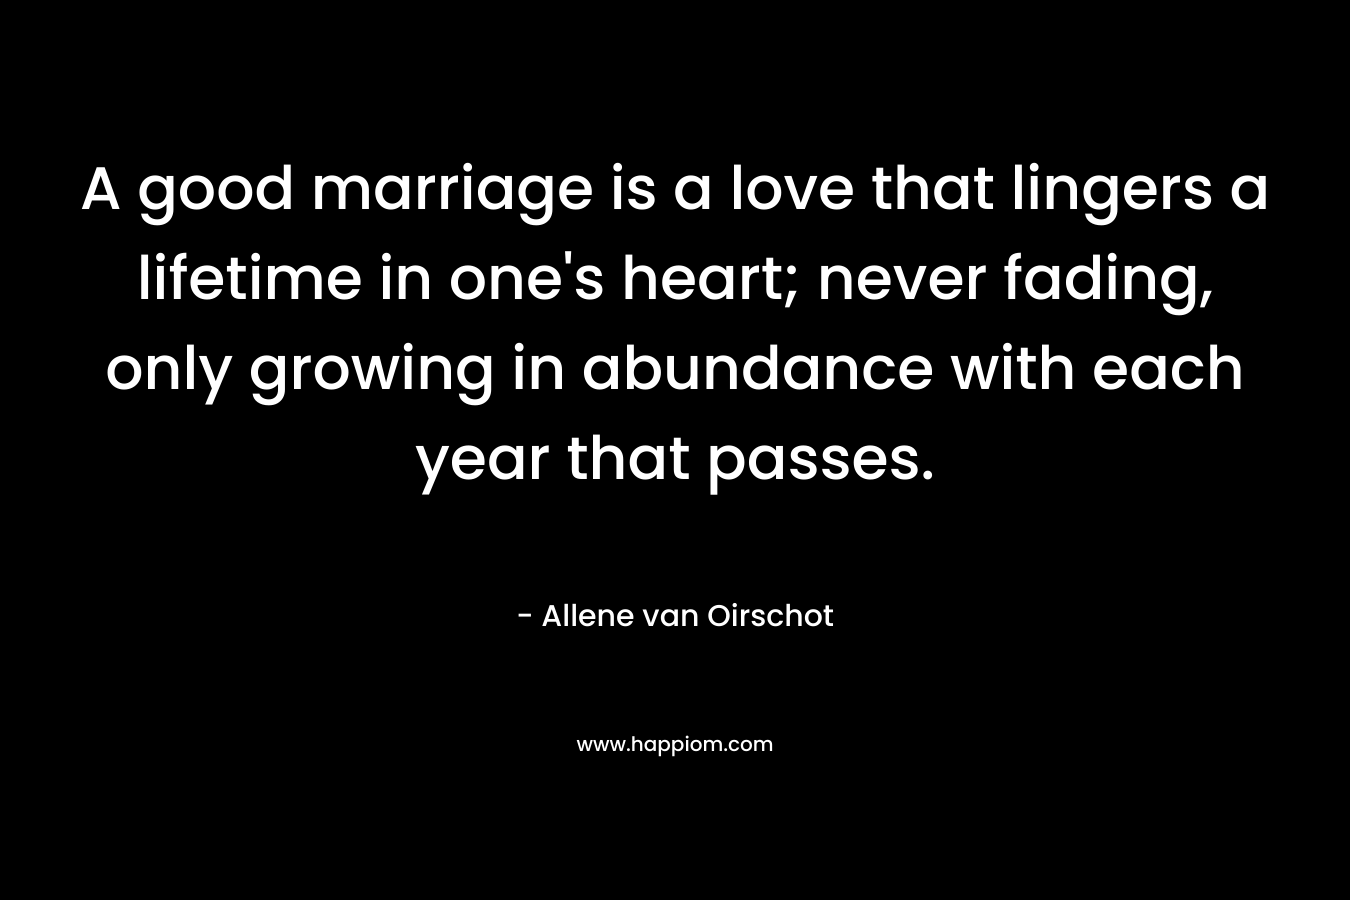 A good marriage is a love that lingers a lifetime in one's heart; never fading, only growing in abundance with each year that passes.